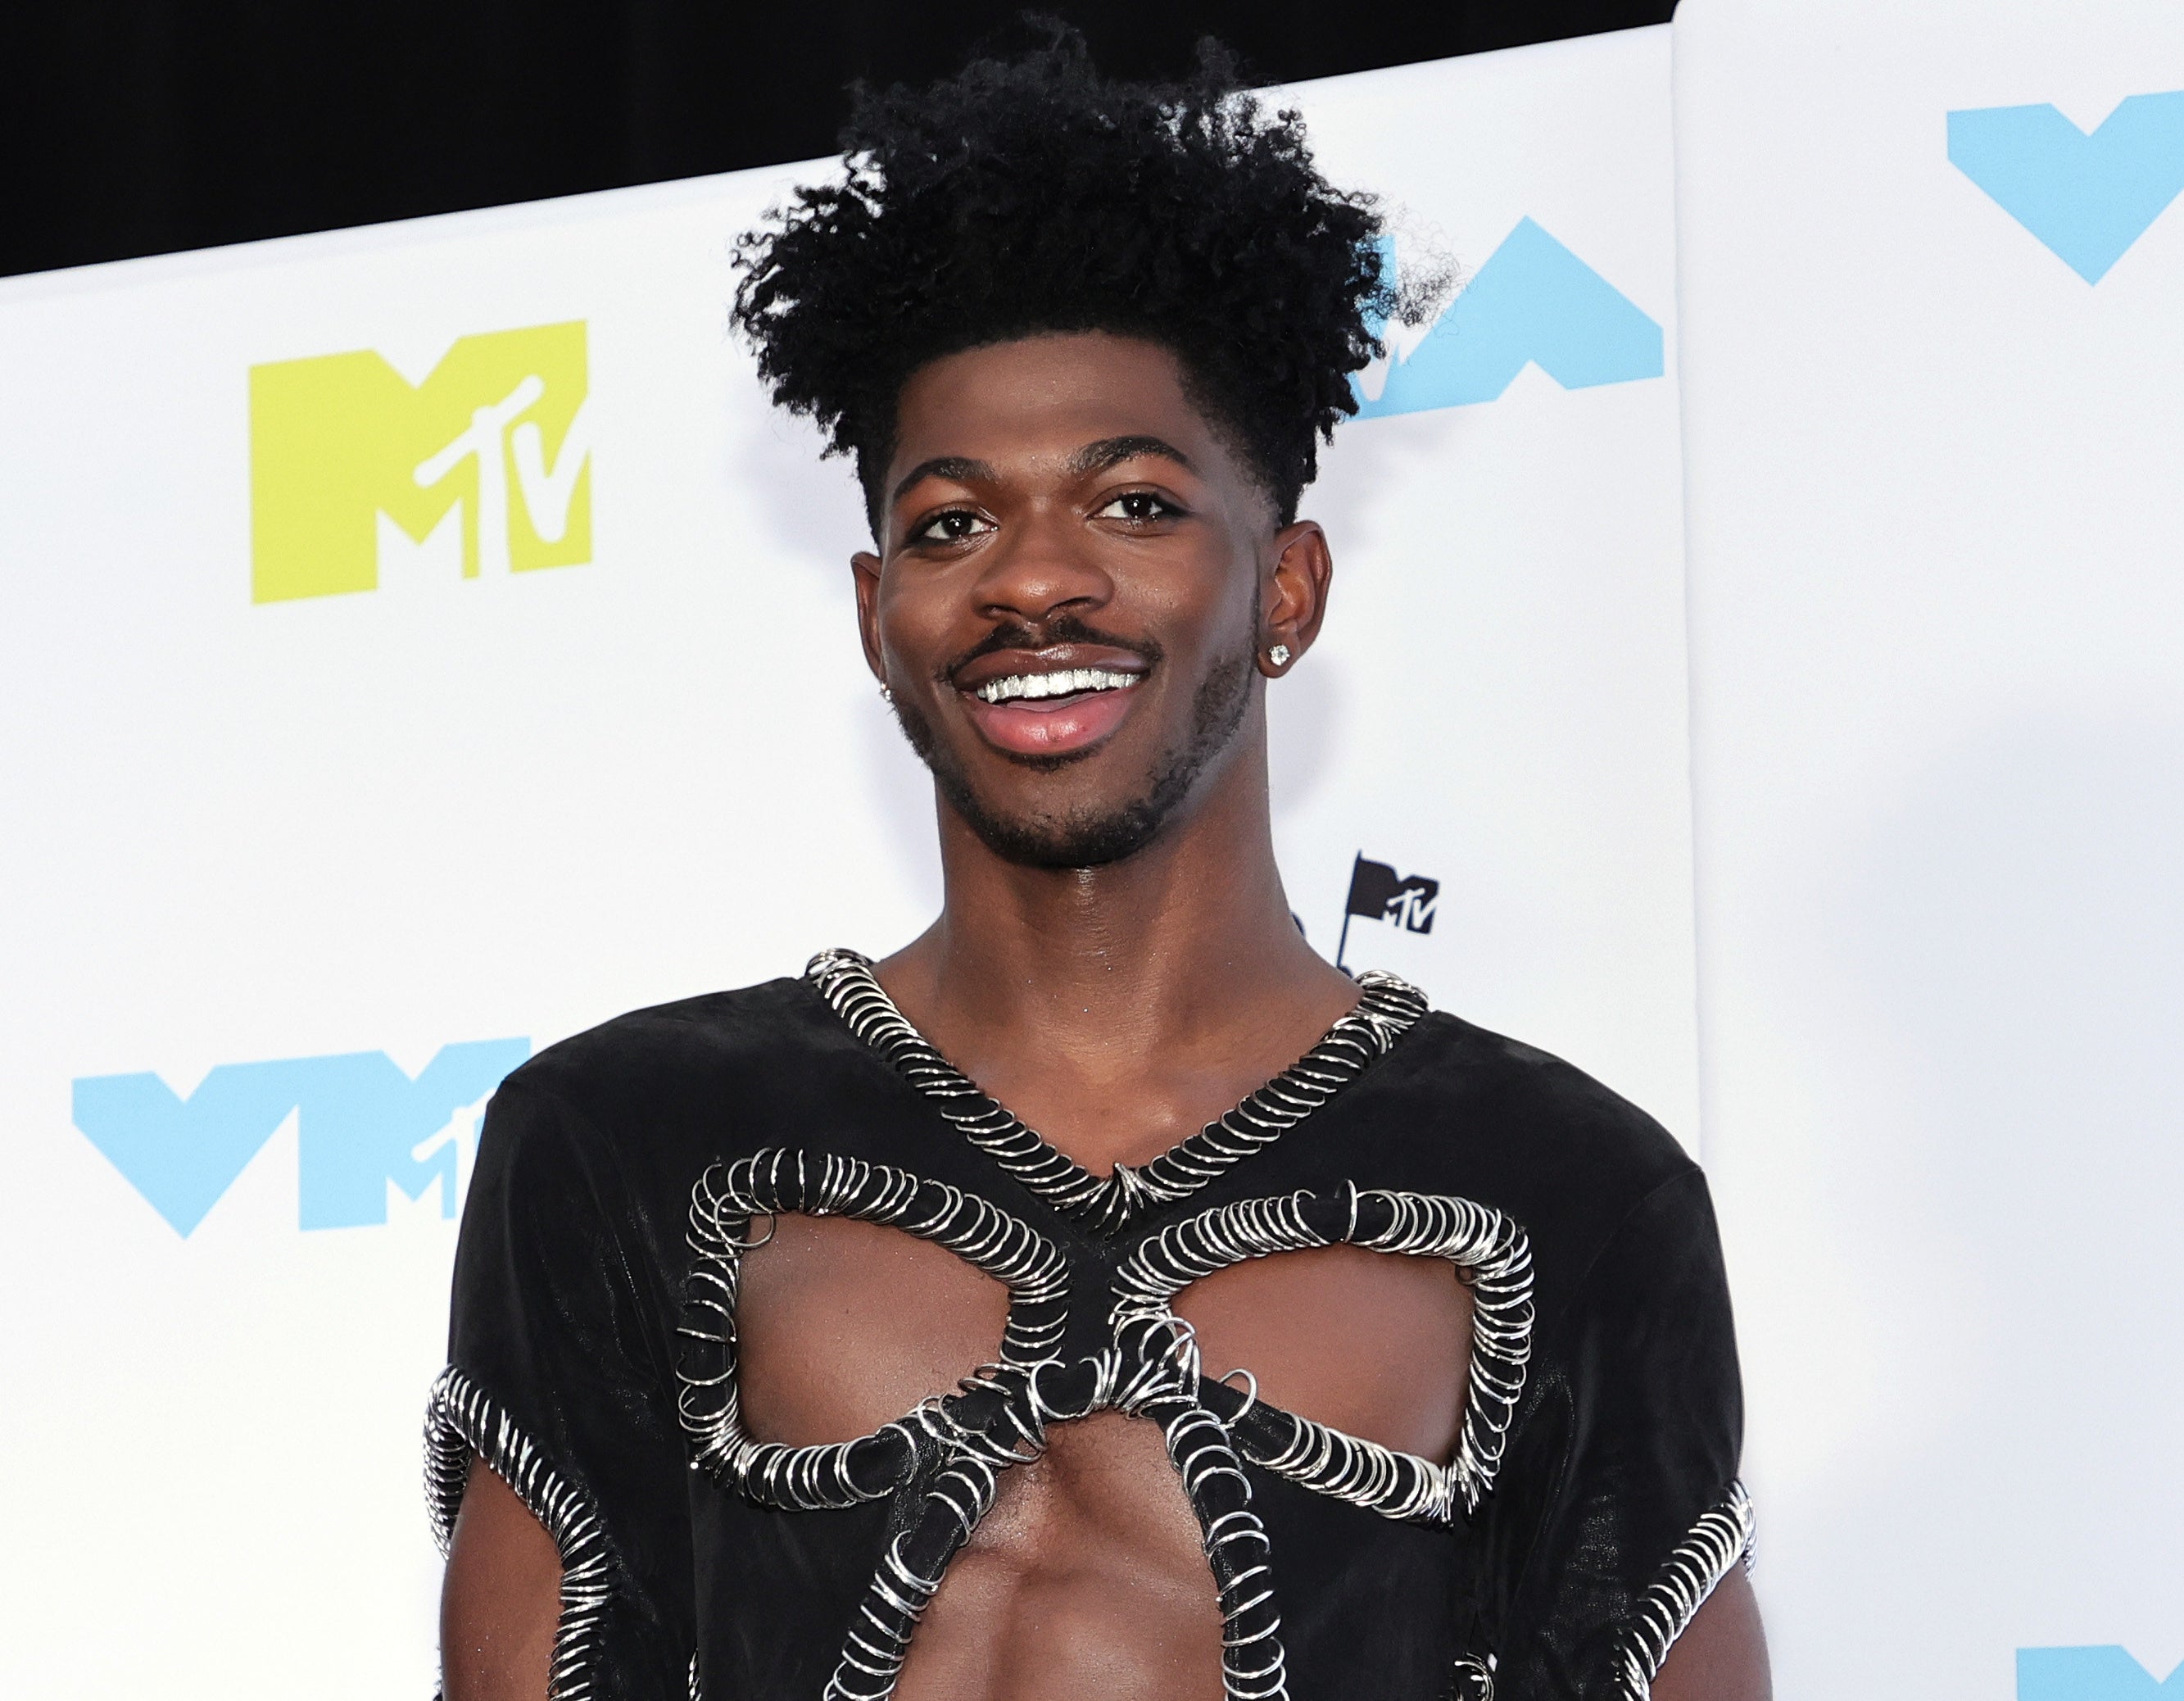 A close-up of Lil Nas smiling